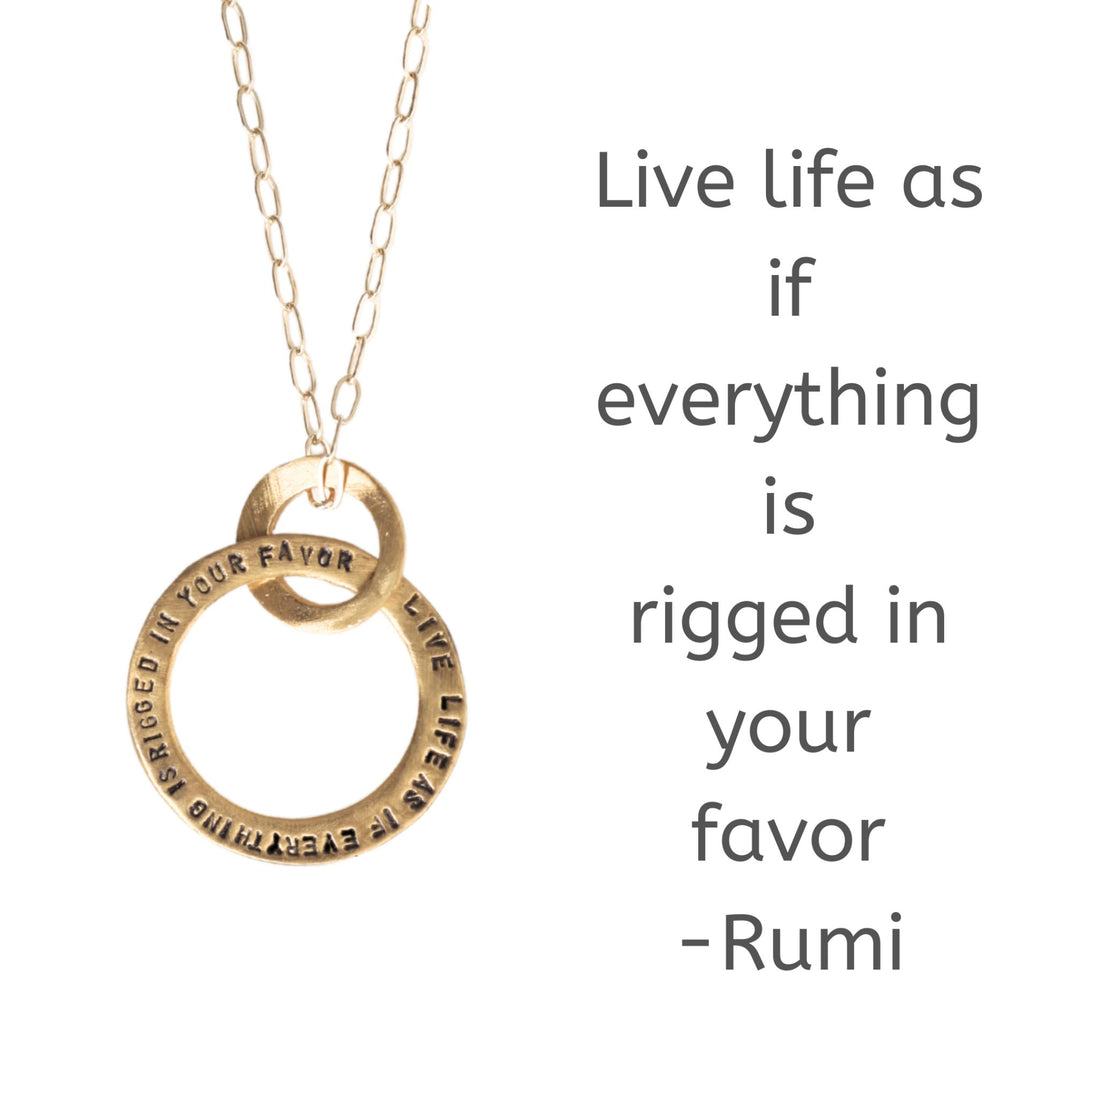 Rumi Message Circle Necklace "Live life as if it is rigged in your favor" - Chocolate and Steel